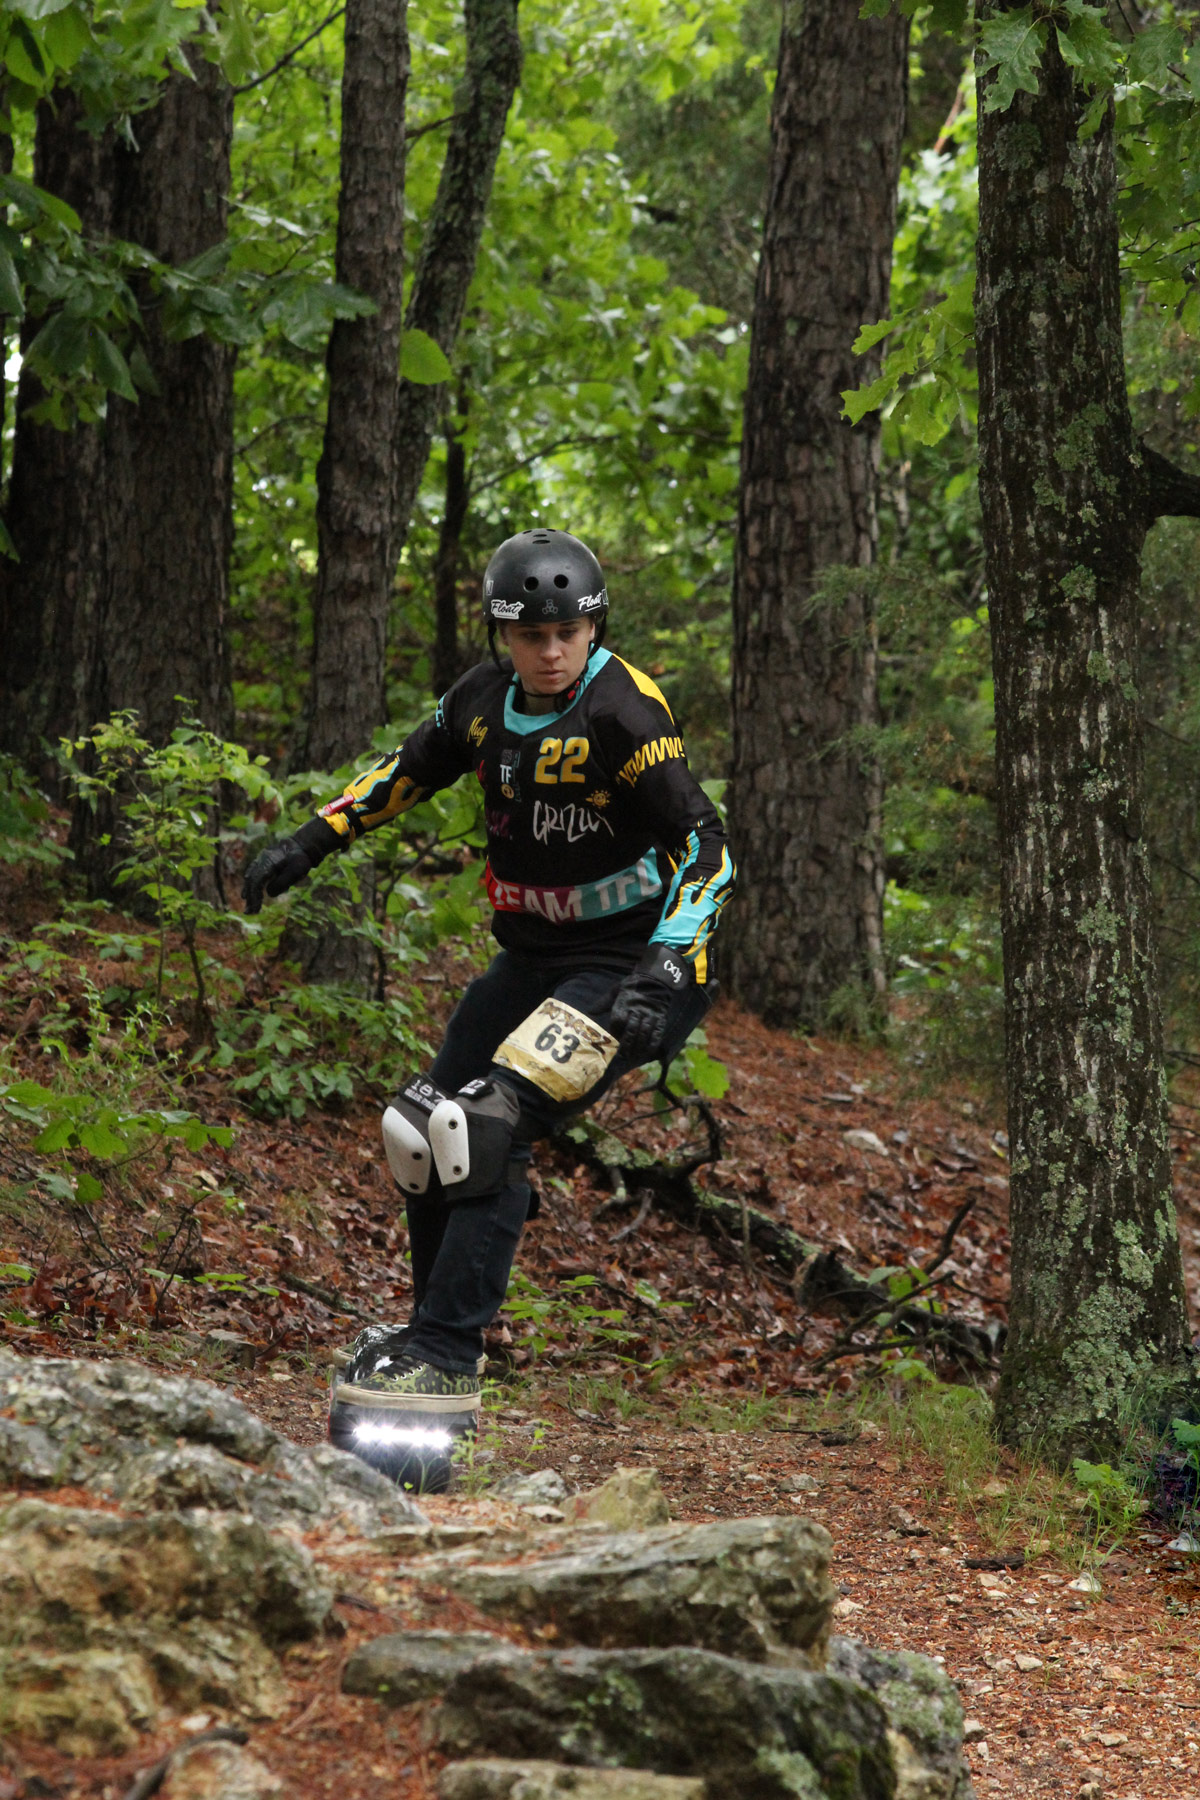 Racheal Cecil on the Lord's Prayer section of the DirtSurferz Onewheel race